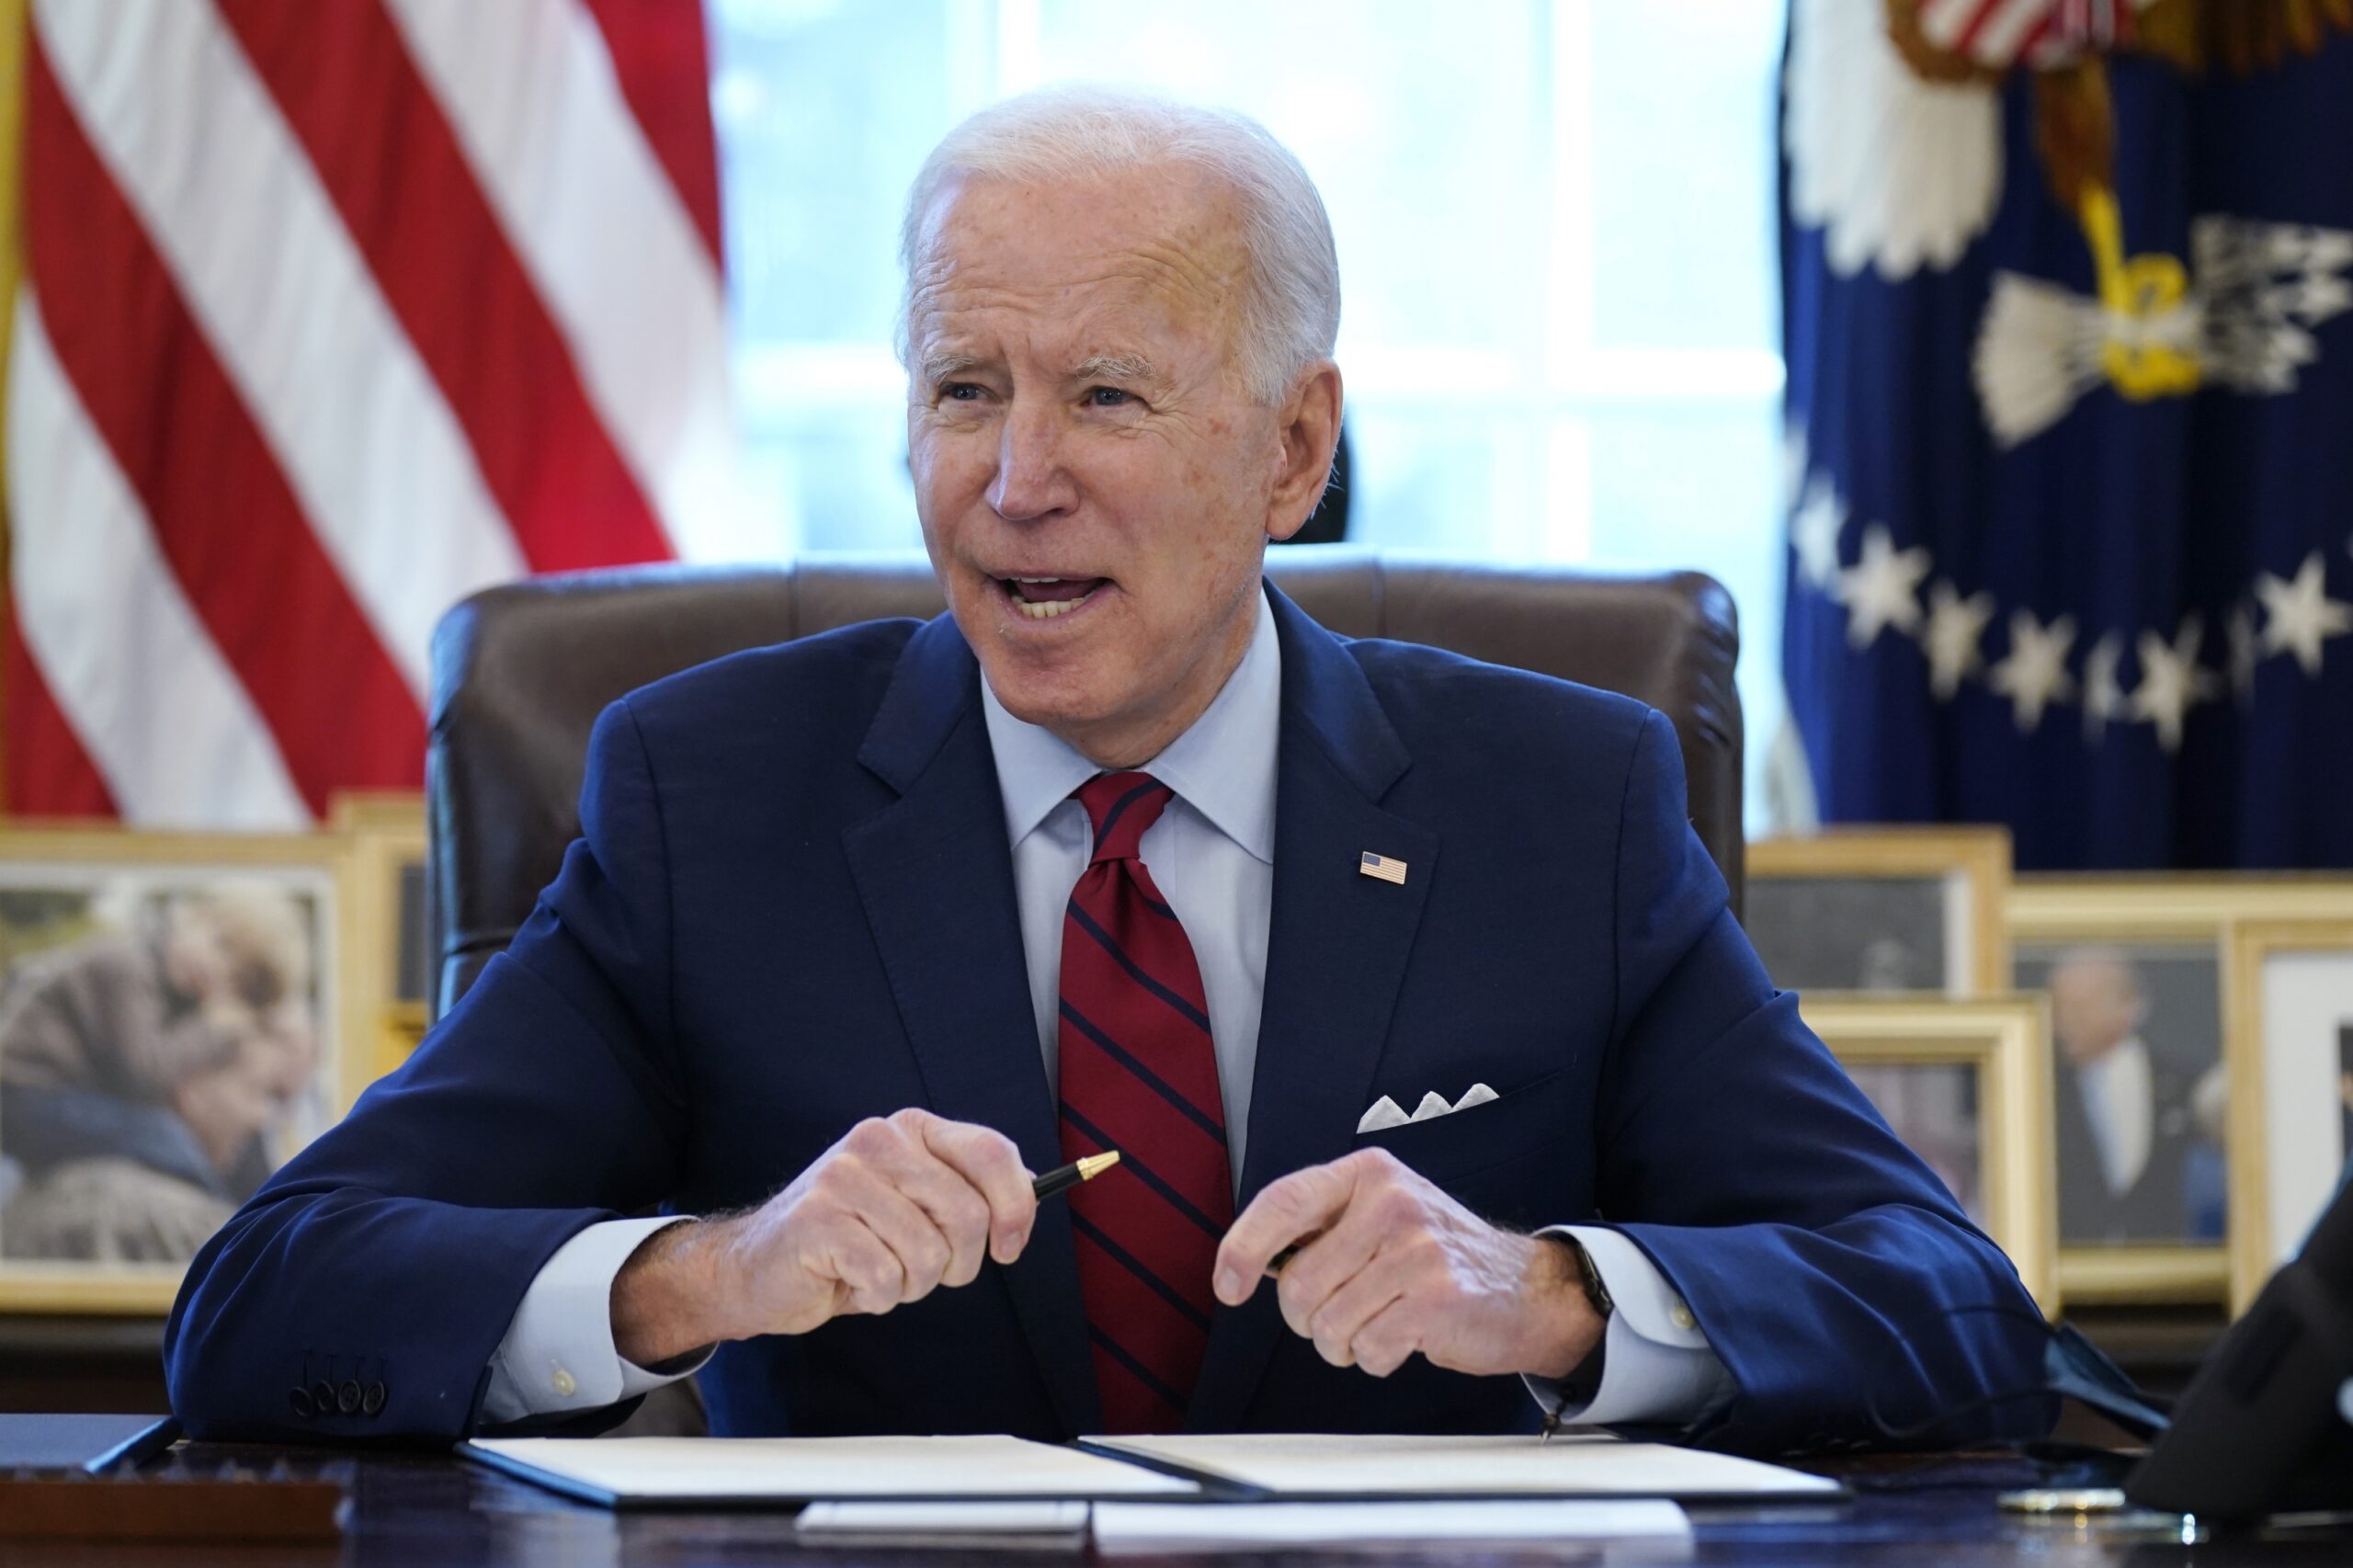 OPINION: Florida will benefit from Biden’s calls for federal gun reform